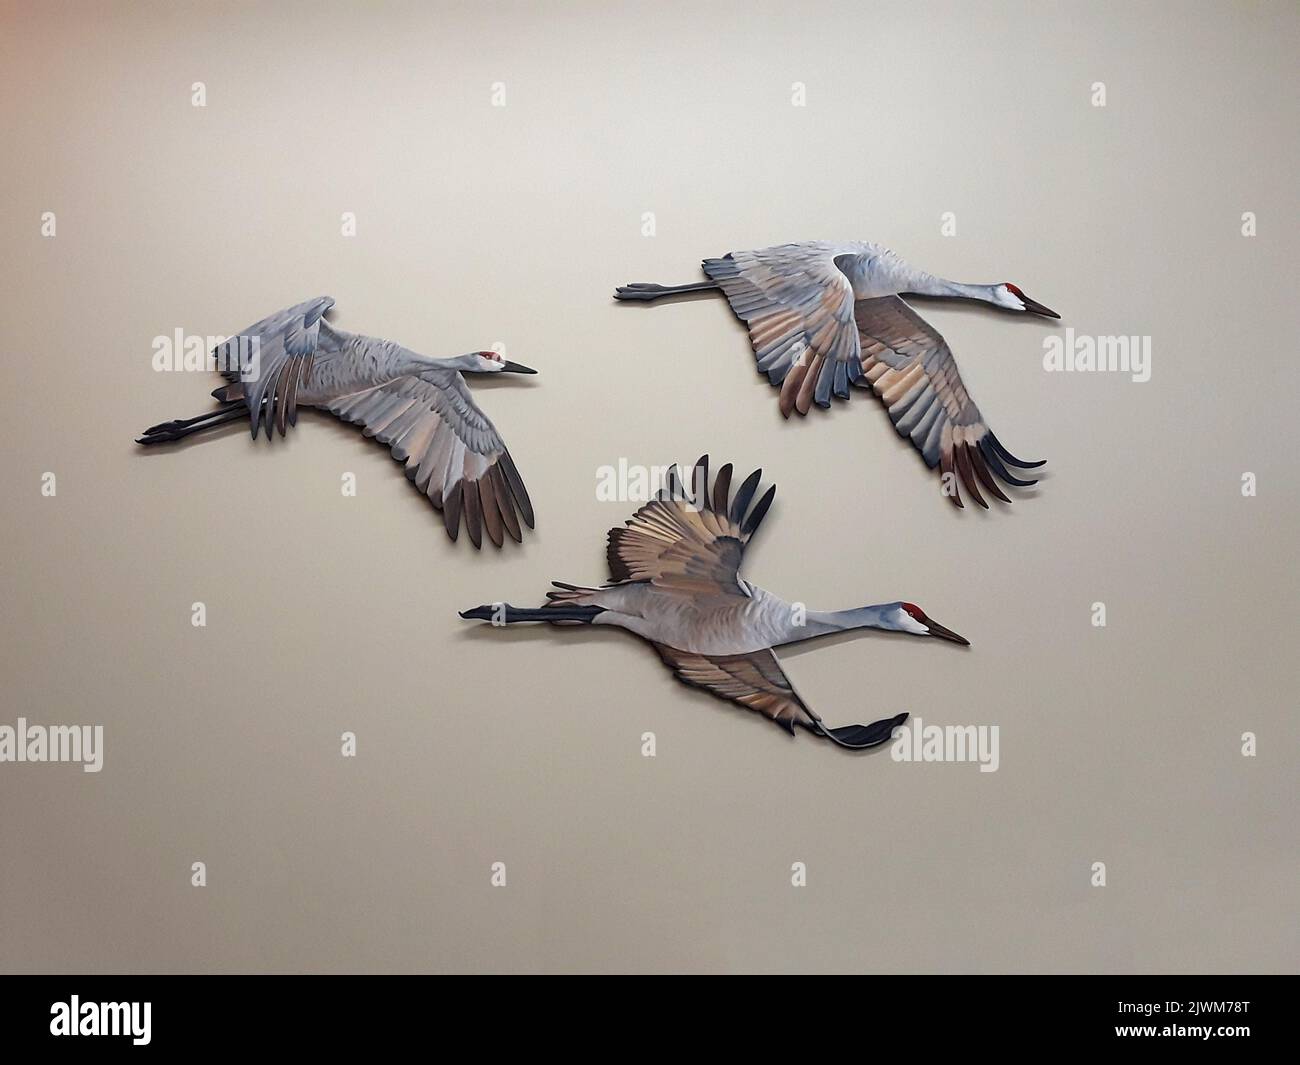 Birds in flight wall hangings in a public children's health waiting area. Stock Photo